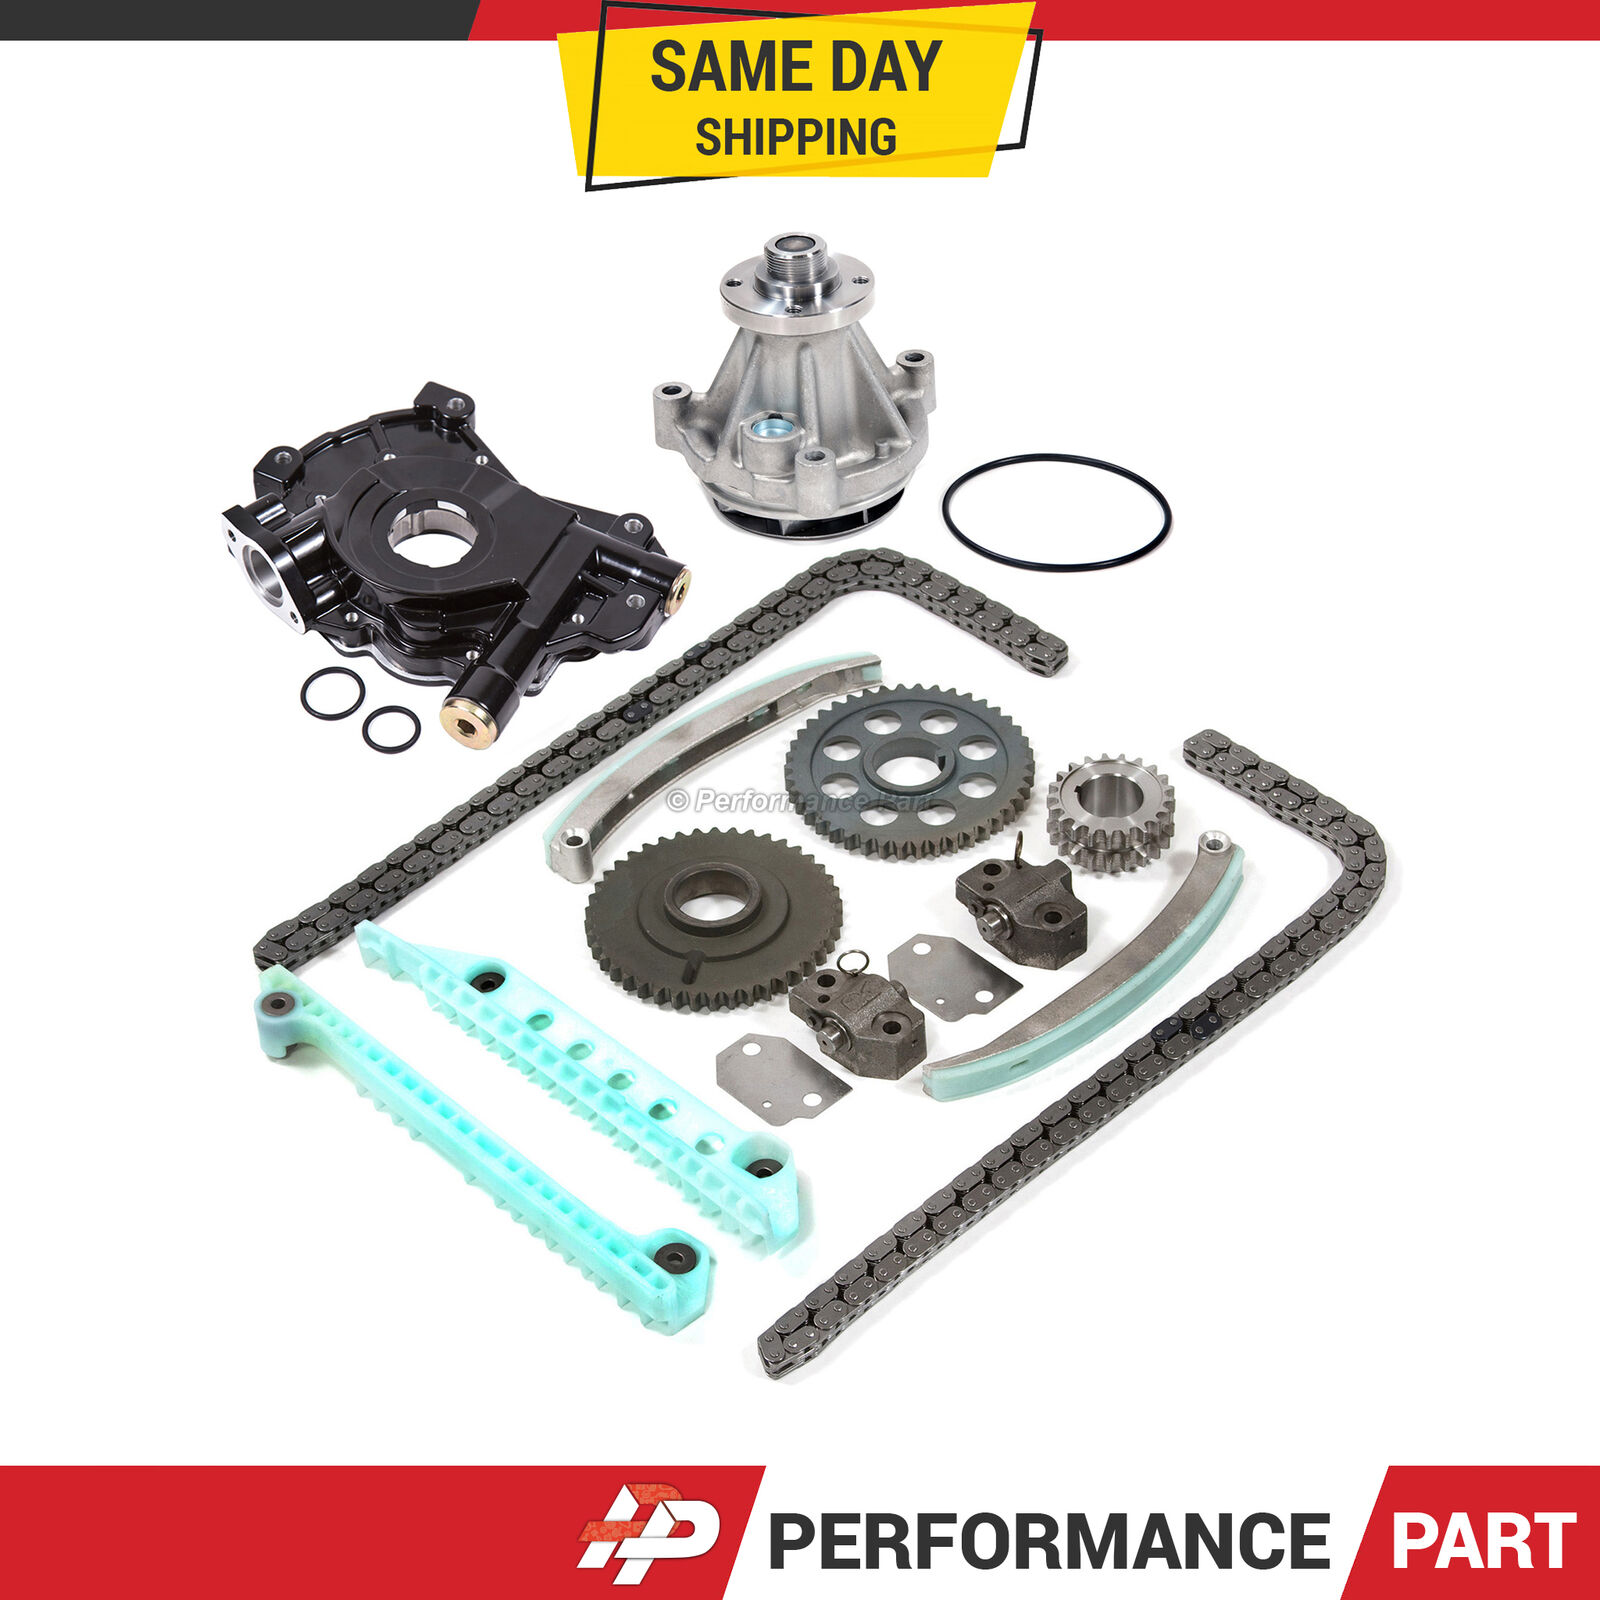 Timing Chain Kit Oil Water Pump for 03-10 Ford Expedition F150 Heritage WINDSOR